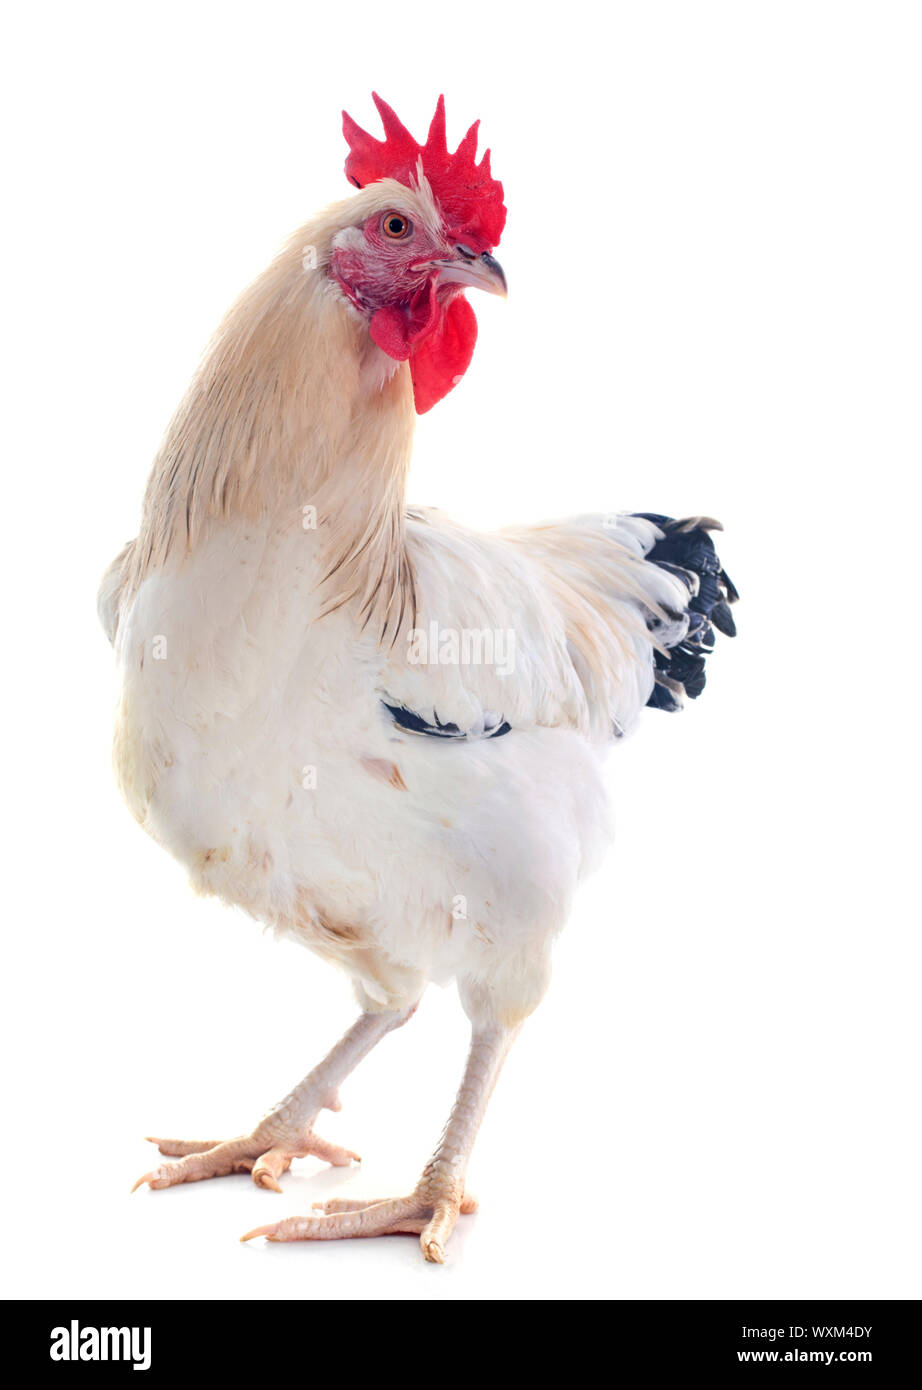 A sussex rooster upright on a white background Stock Photo